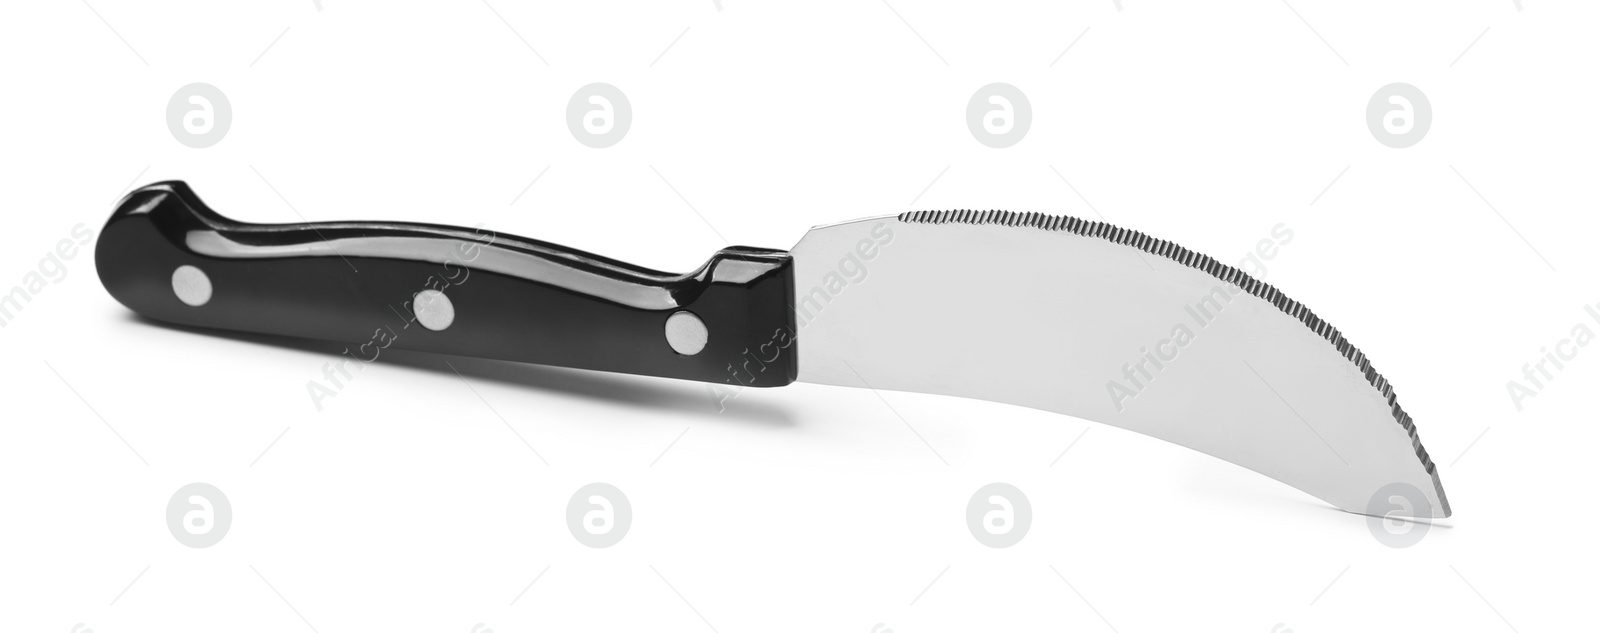 Photo of Stainless steel pizza knife with plastic handle isolated on white